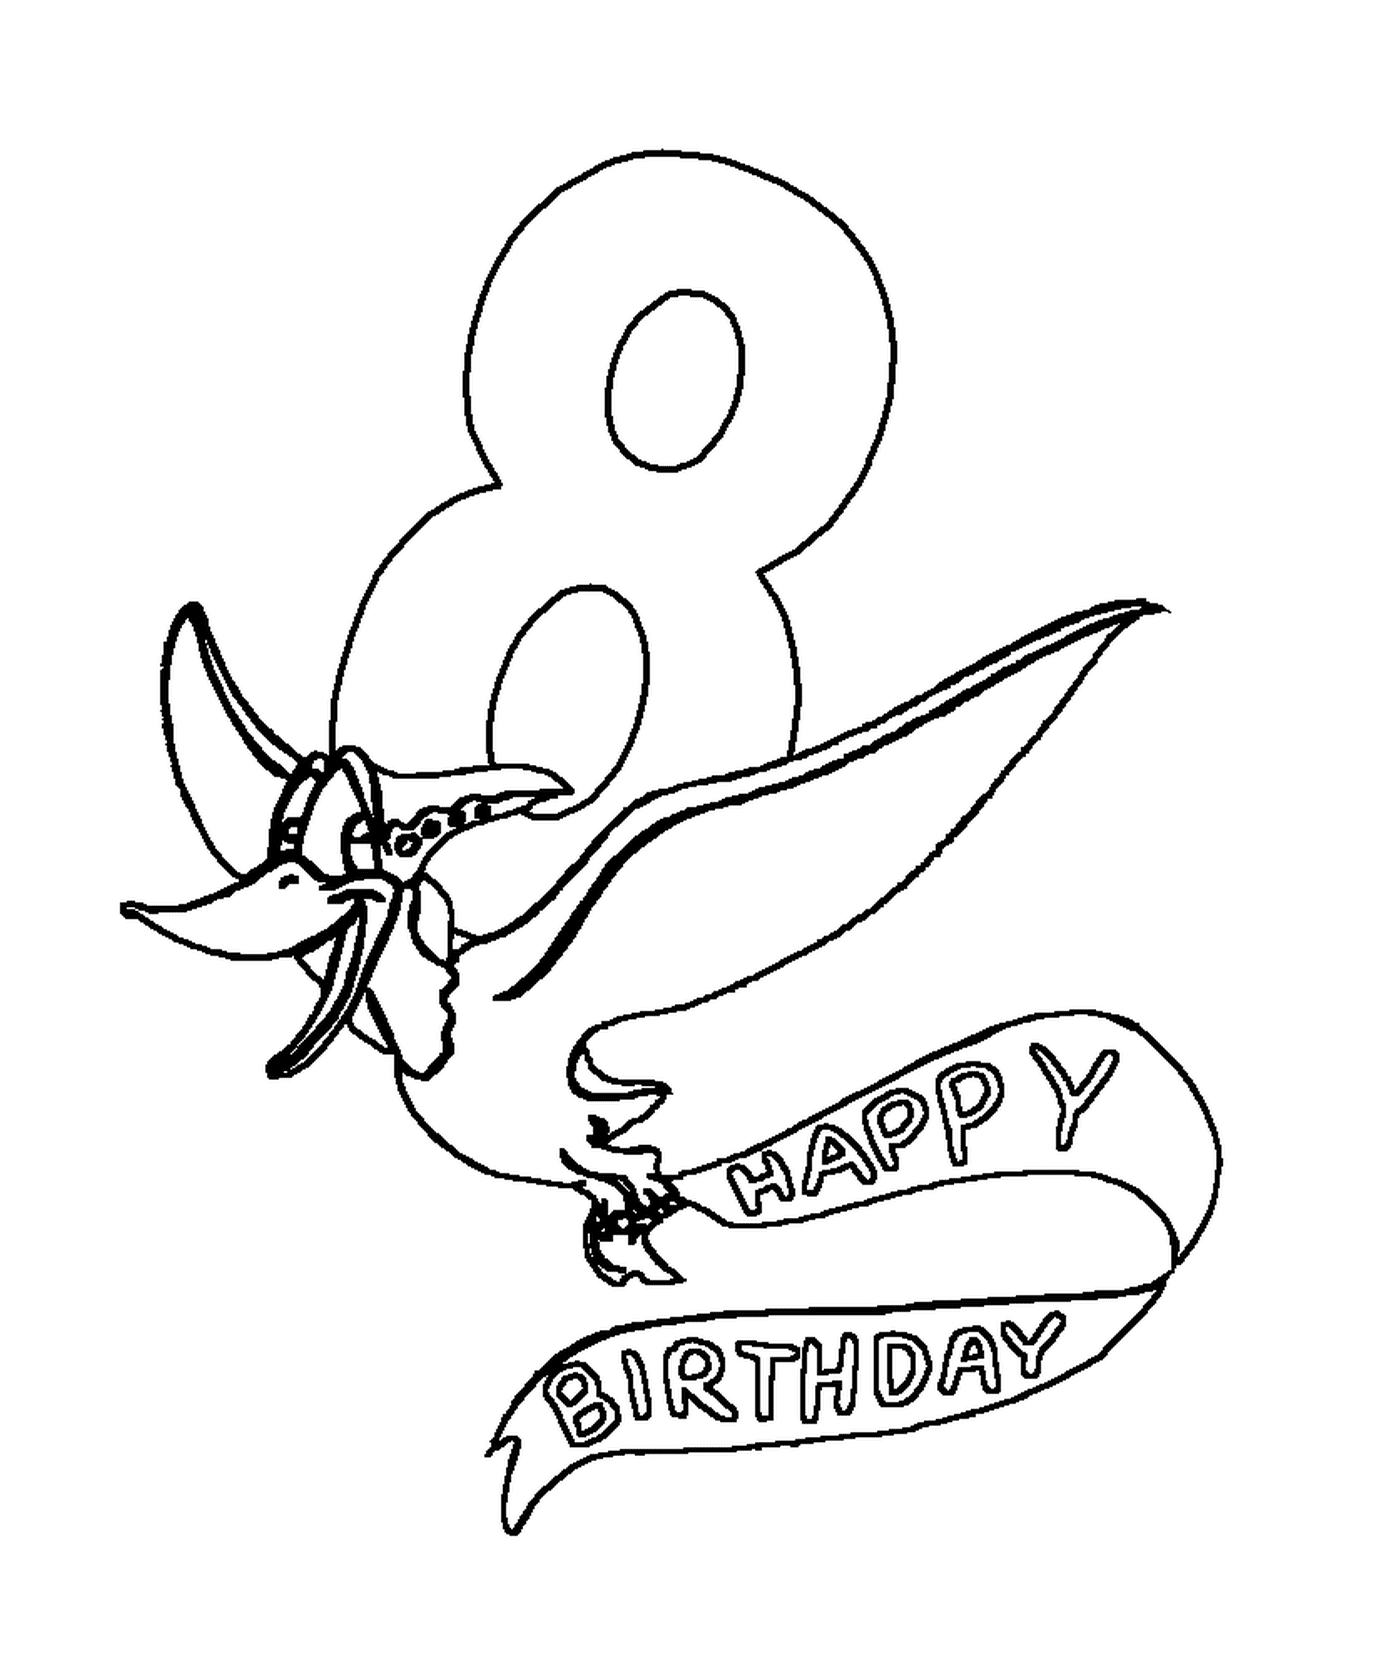  Image of a birthday card for a child 